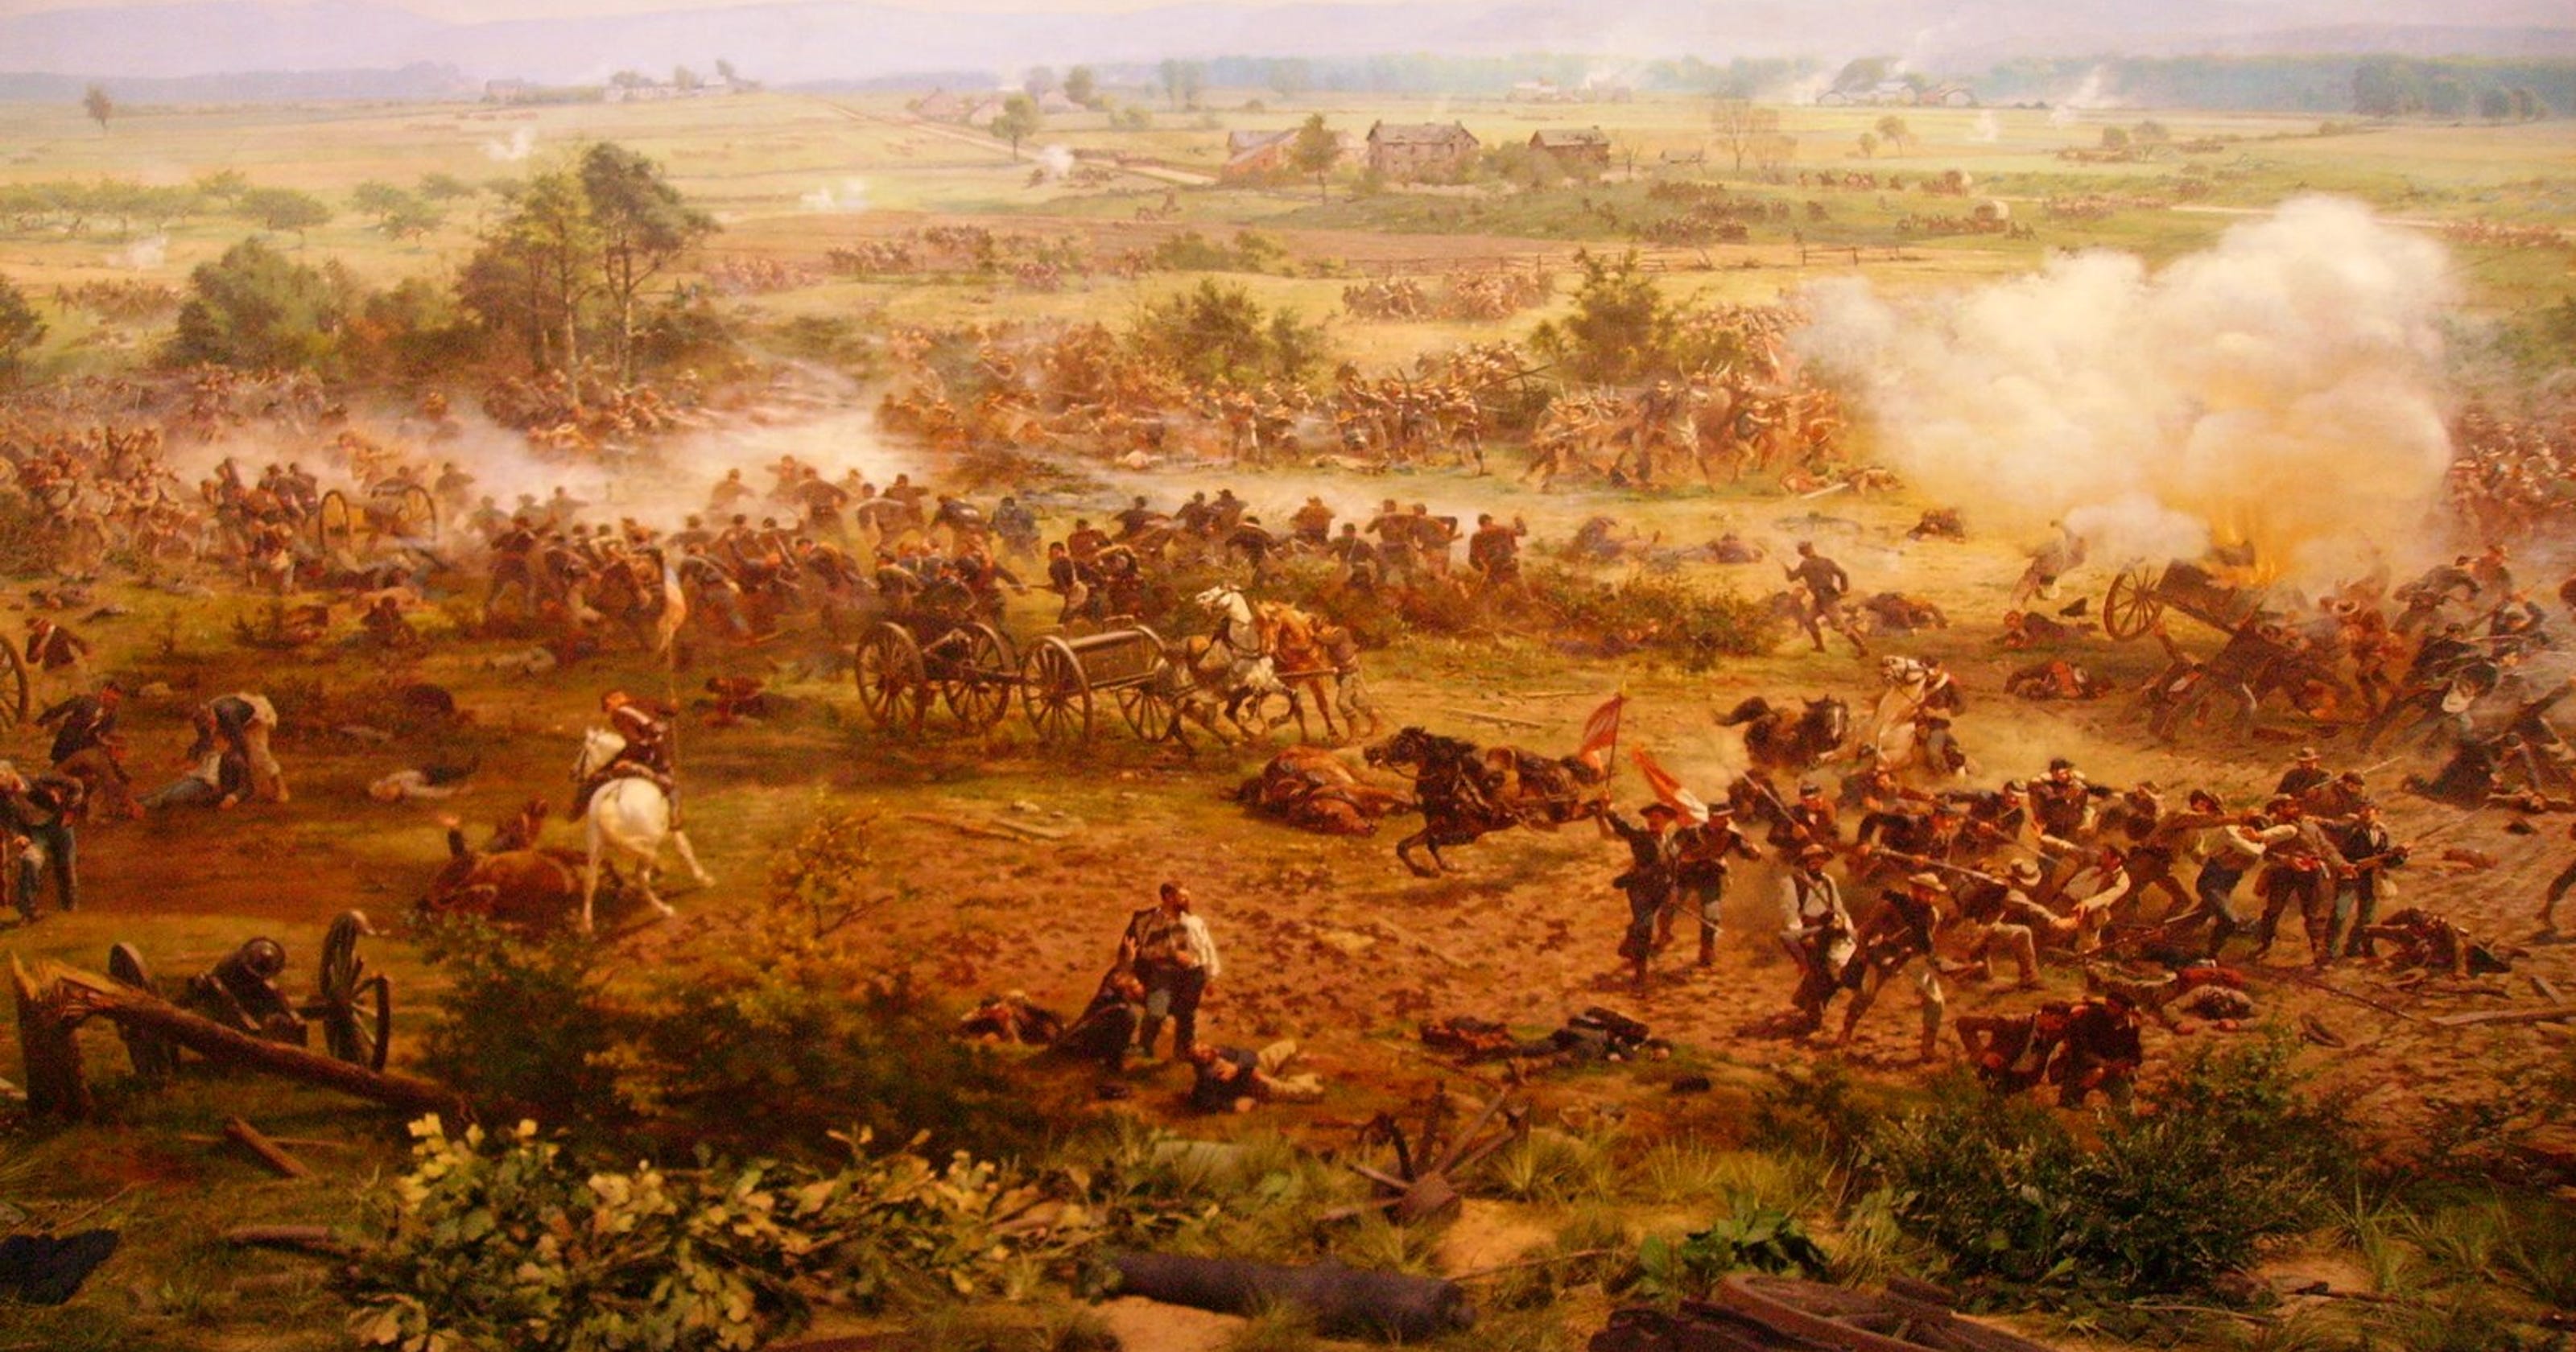 Gettysburg Cyclorama is featured at museum dinner3200 x 1680